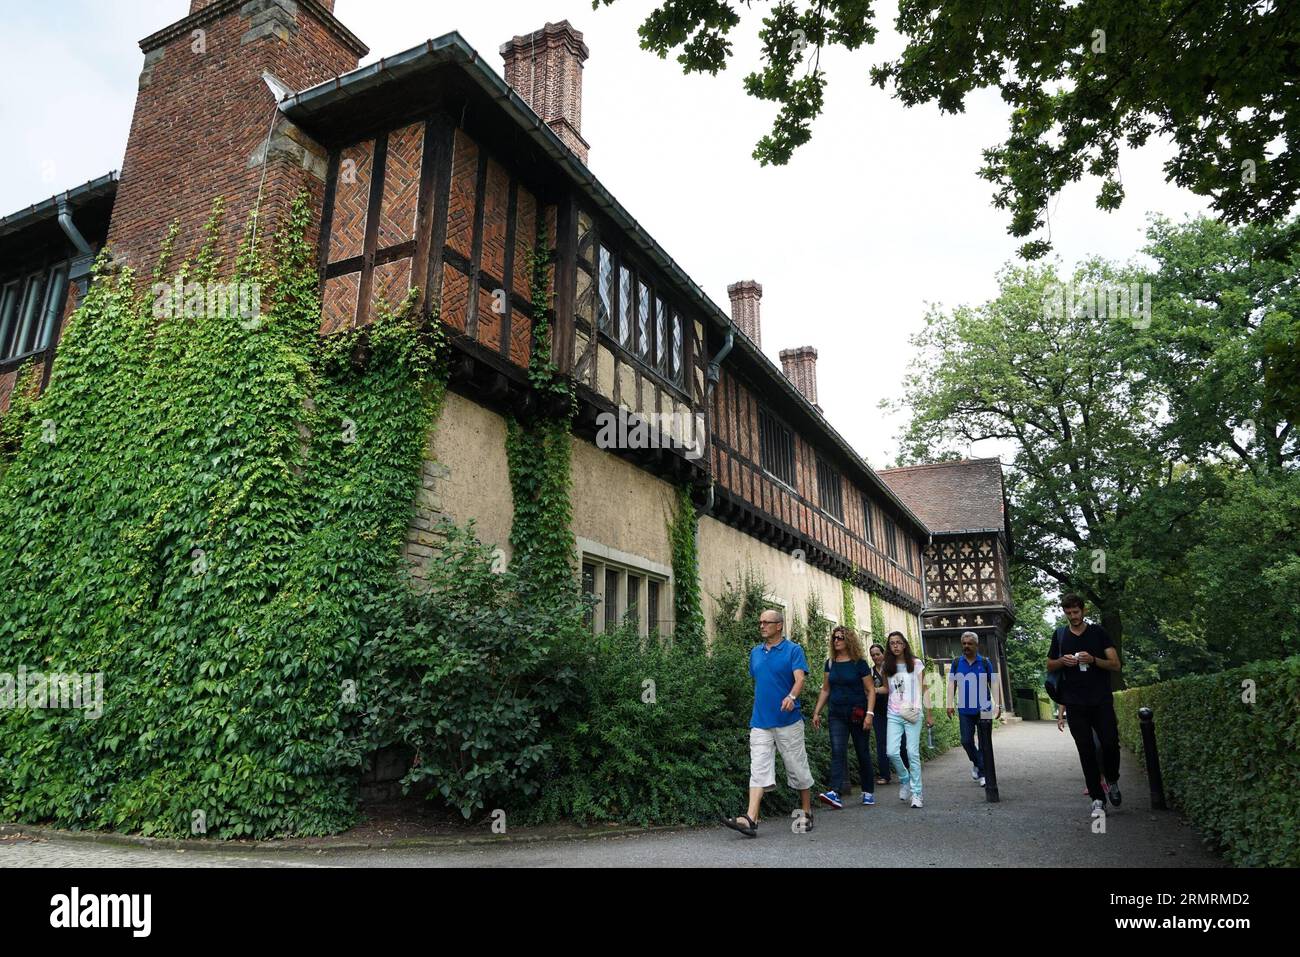 (140726) -- POTSDAM, July 26, 2014 (Xinhua) -- People visit the Cecilienhof Palace in Potsdam, capital of Germany s Brandenburg state, where the Potsdam Proclamation was issued in 1945, July 26, 2014. Saturday marks the 69th anniversary of the July 26, 1945 Potsdam Proclamation demanding Japan s unconditional surrender to the Allies at the end of World War II, in the wake of its wartime aggression. (Xinhua/Liu Yinan) GERMANY-POTSDAM-POTSDAM PROCLAMATION-ANNIVERSARY PUBLICATIONxNOTxINxCHN   Potsdam July 26 2014 XINHUA Celebrities Visit The Cecilienhof Palace in Potsdam Capital of Germany S Bran Stock Photo